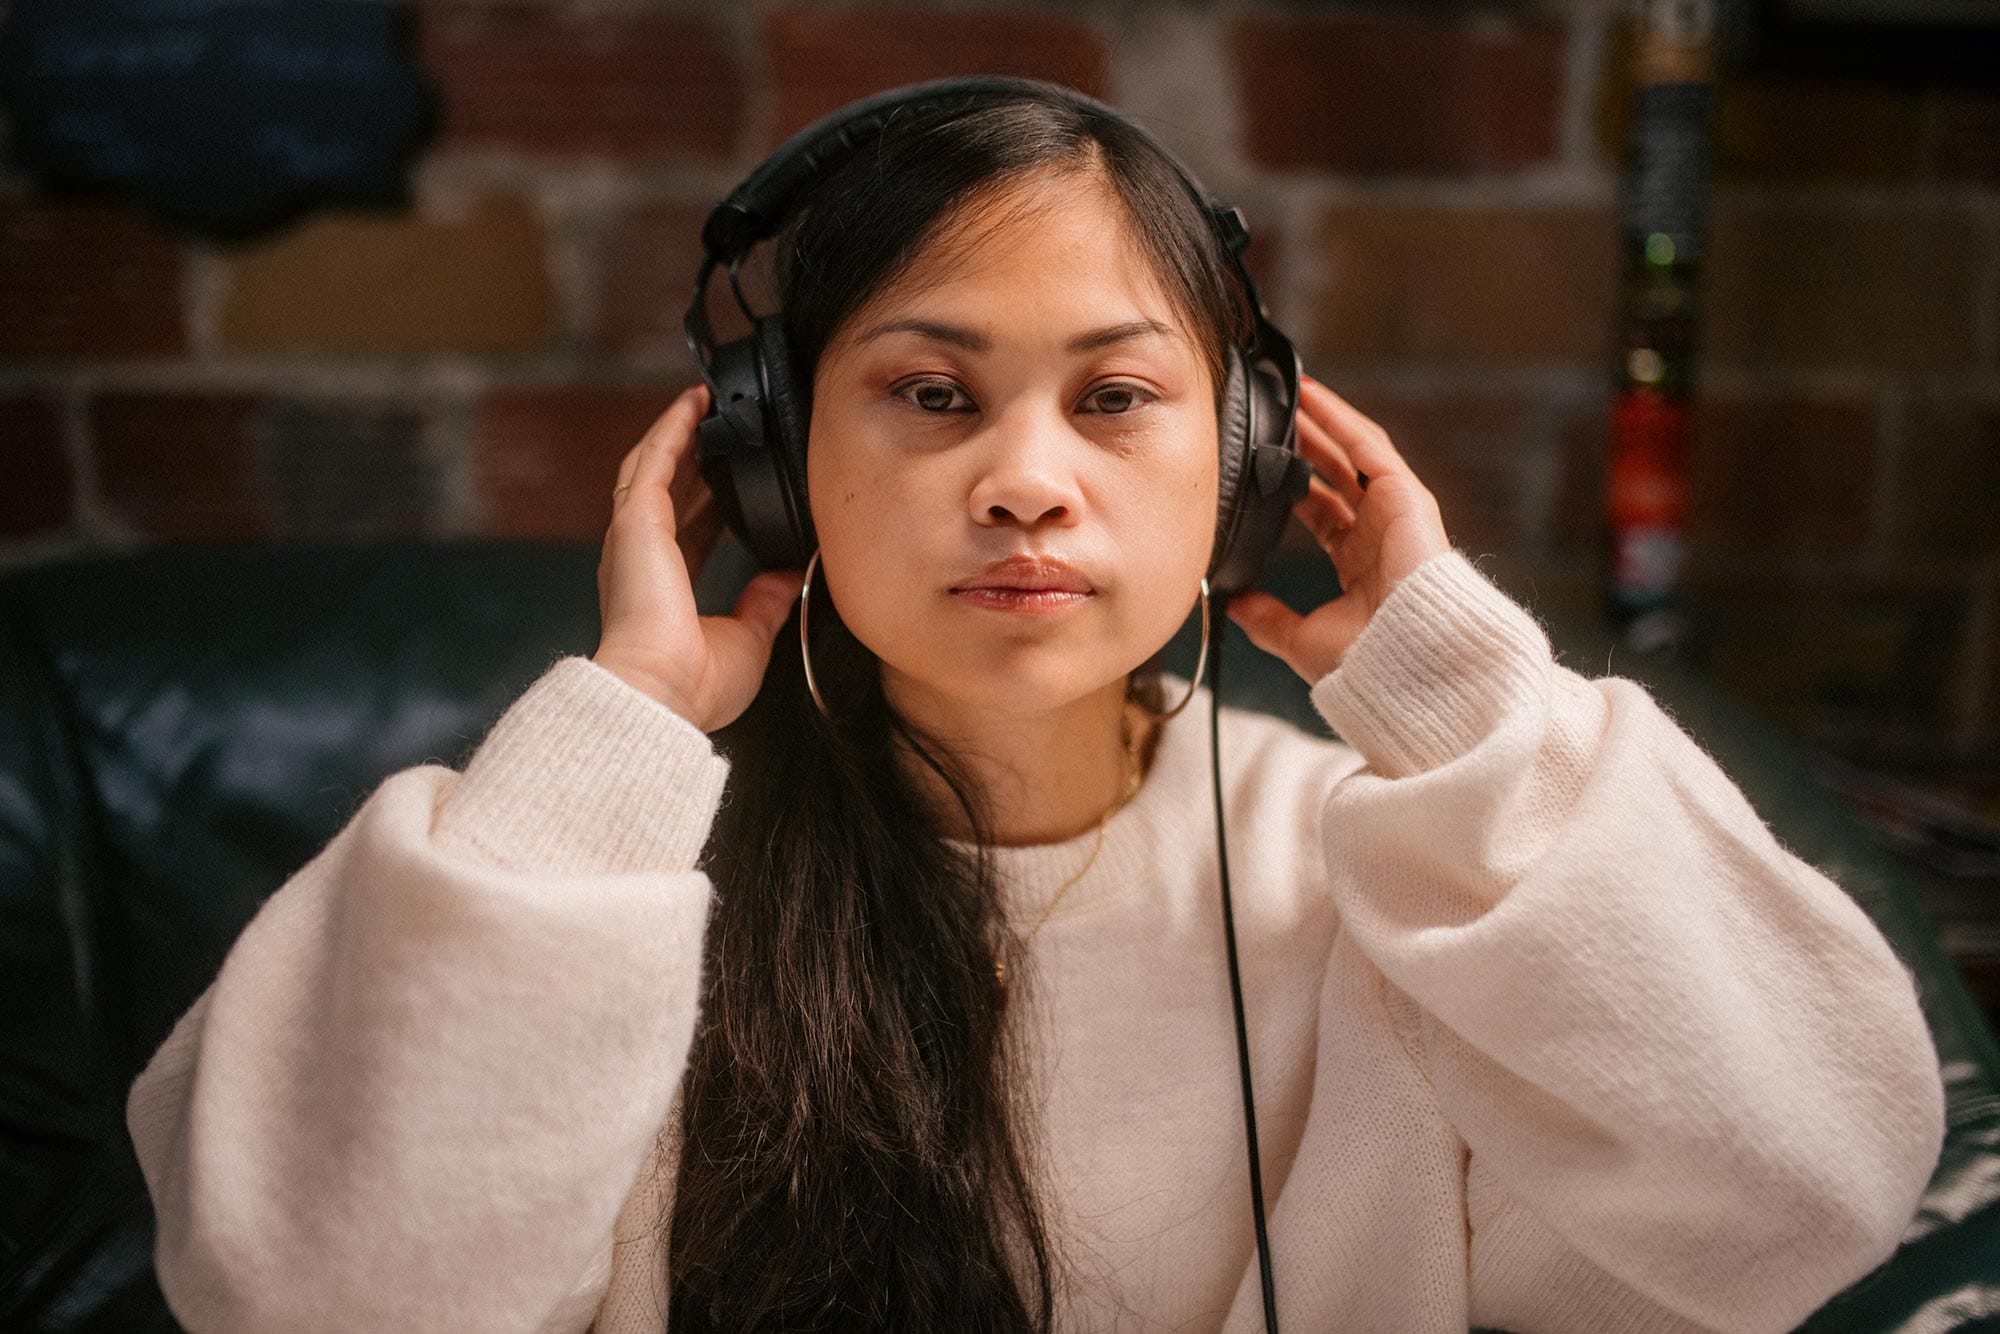 Ruby Ibarra listening to music through a headset.